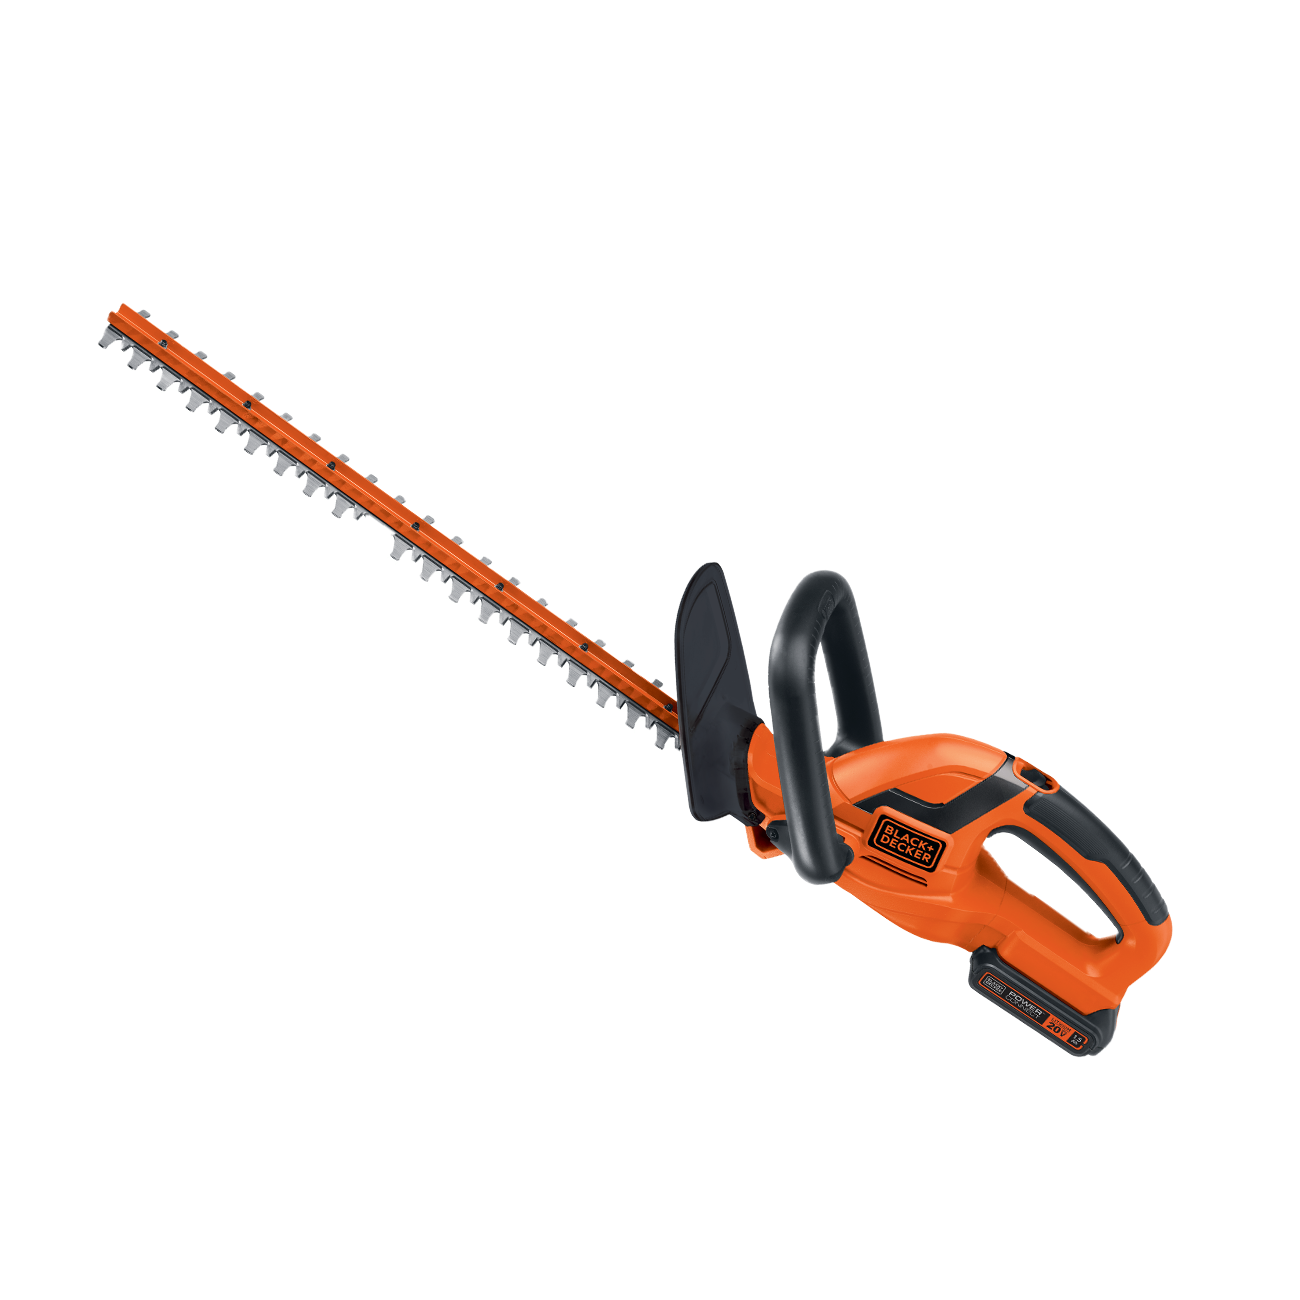  BLACK+DECKER 20V MAX Cordless Hedge Trimmer with Power Command  Powercut, 22-Inch (LHT321FF) : Patio, Lawn & Garden